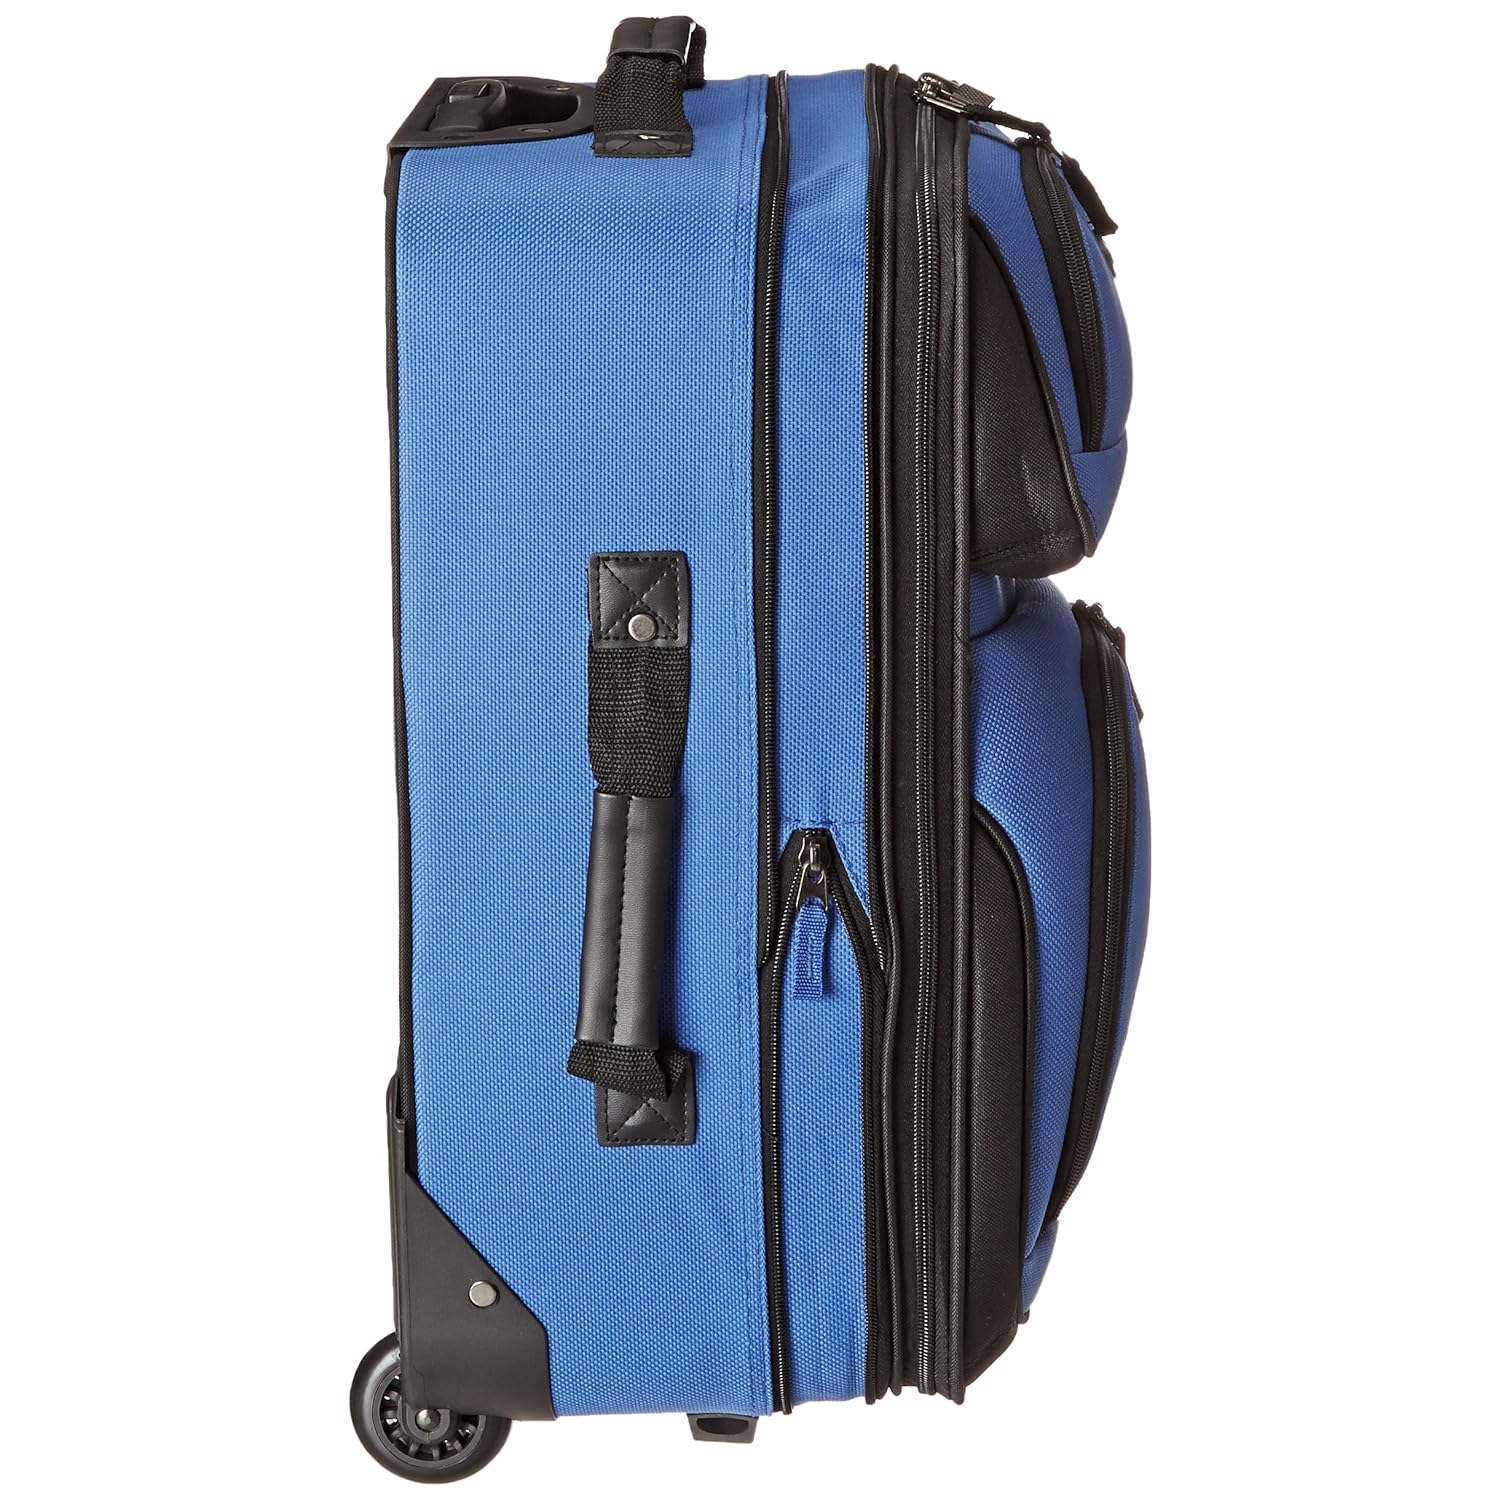 GCP Products Traveler Rio Rugged Fabric Expandable Carry-On Luggage Set, Royal Blue, 2-Piece